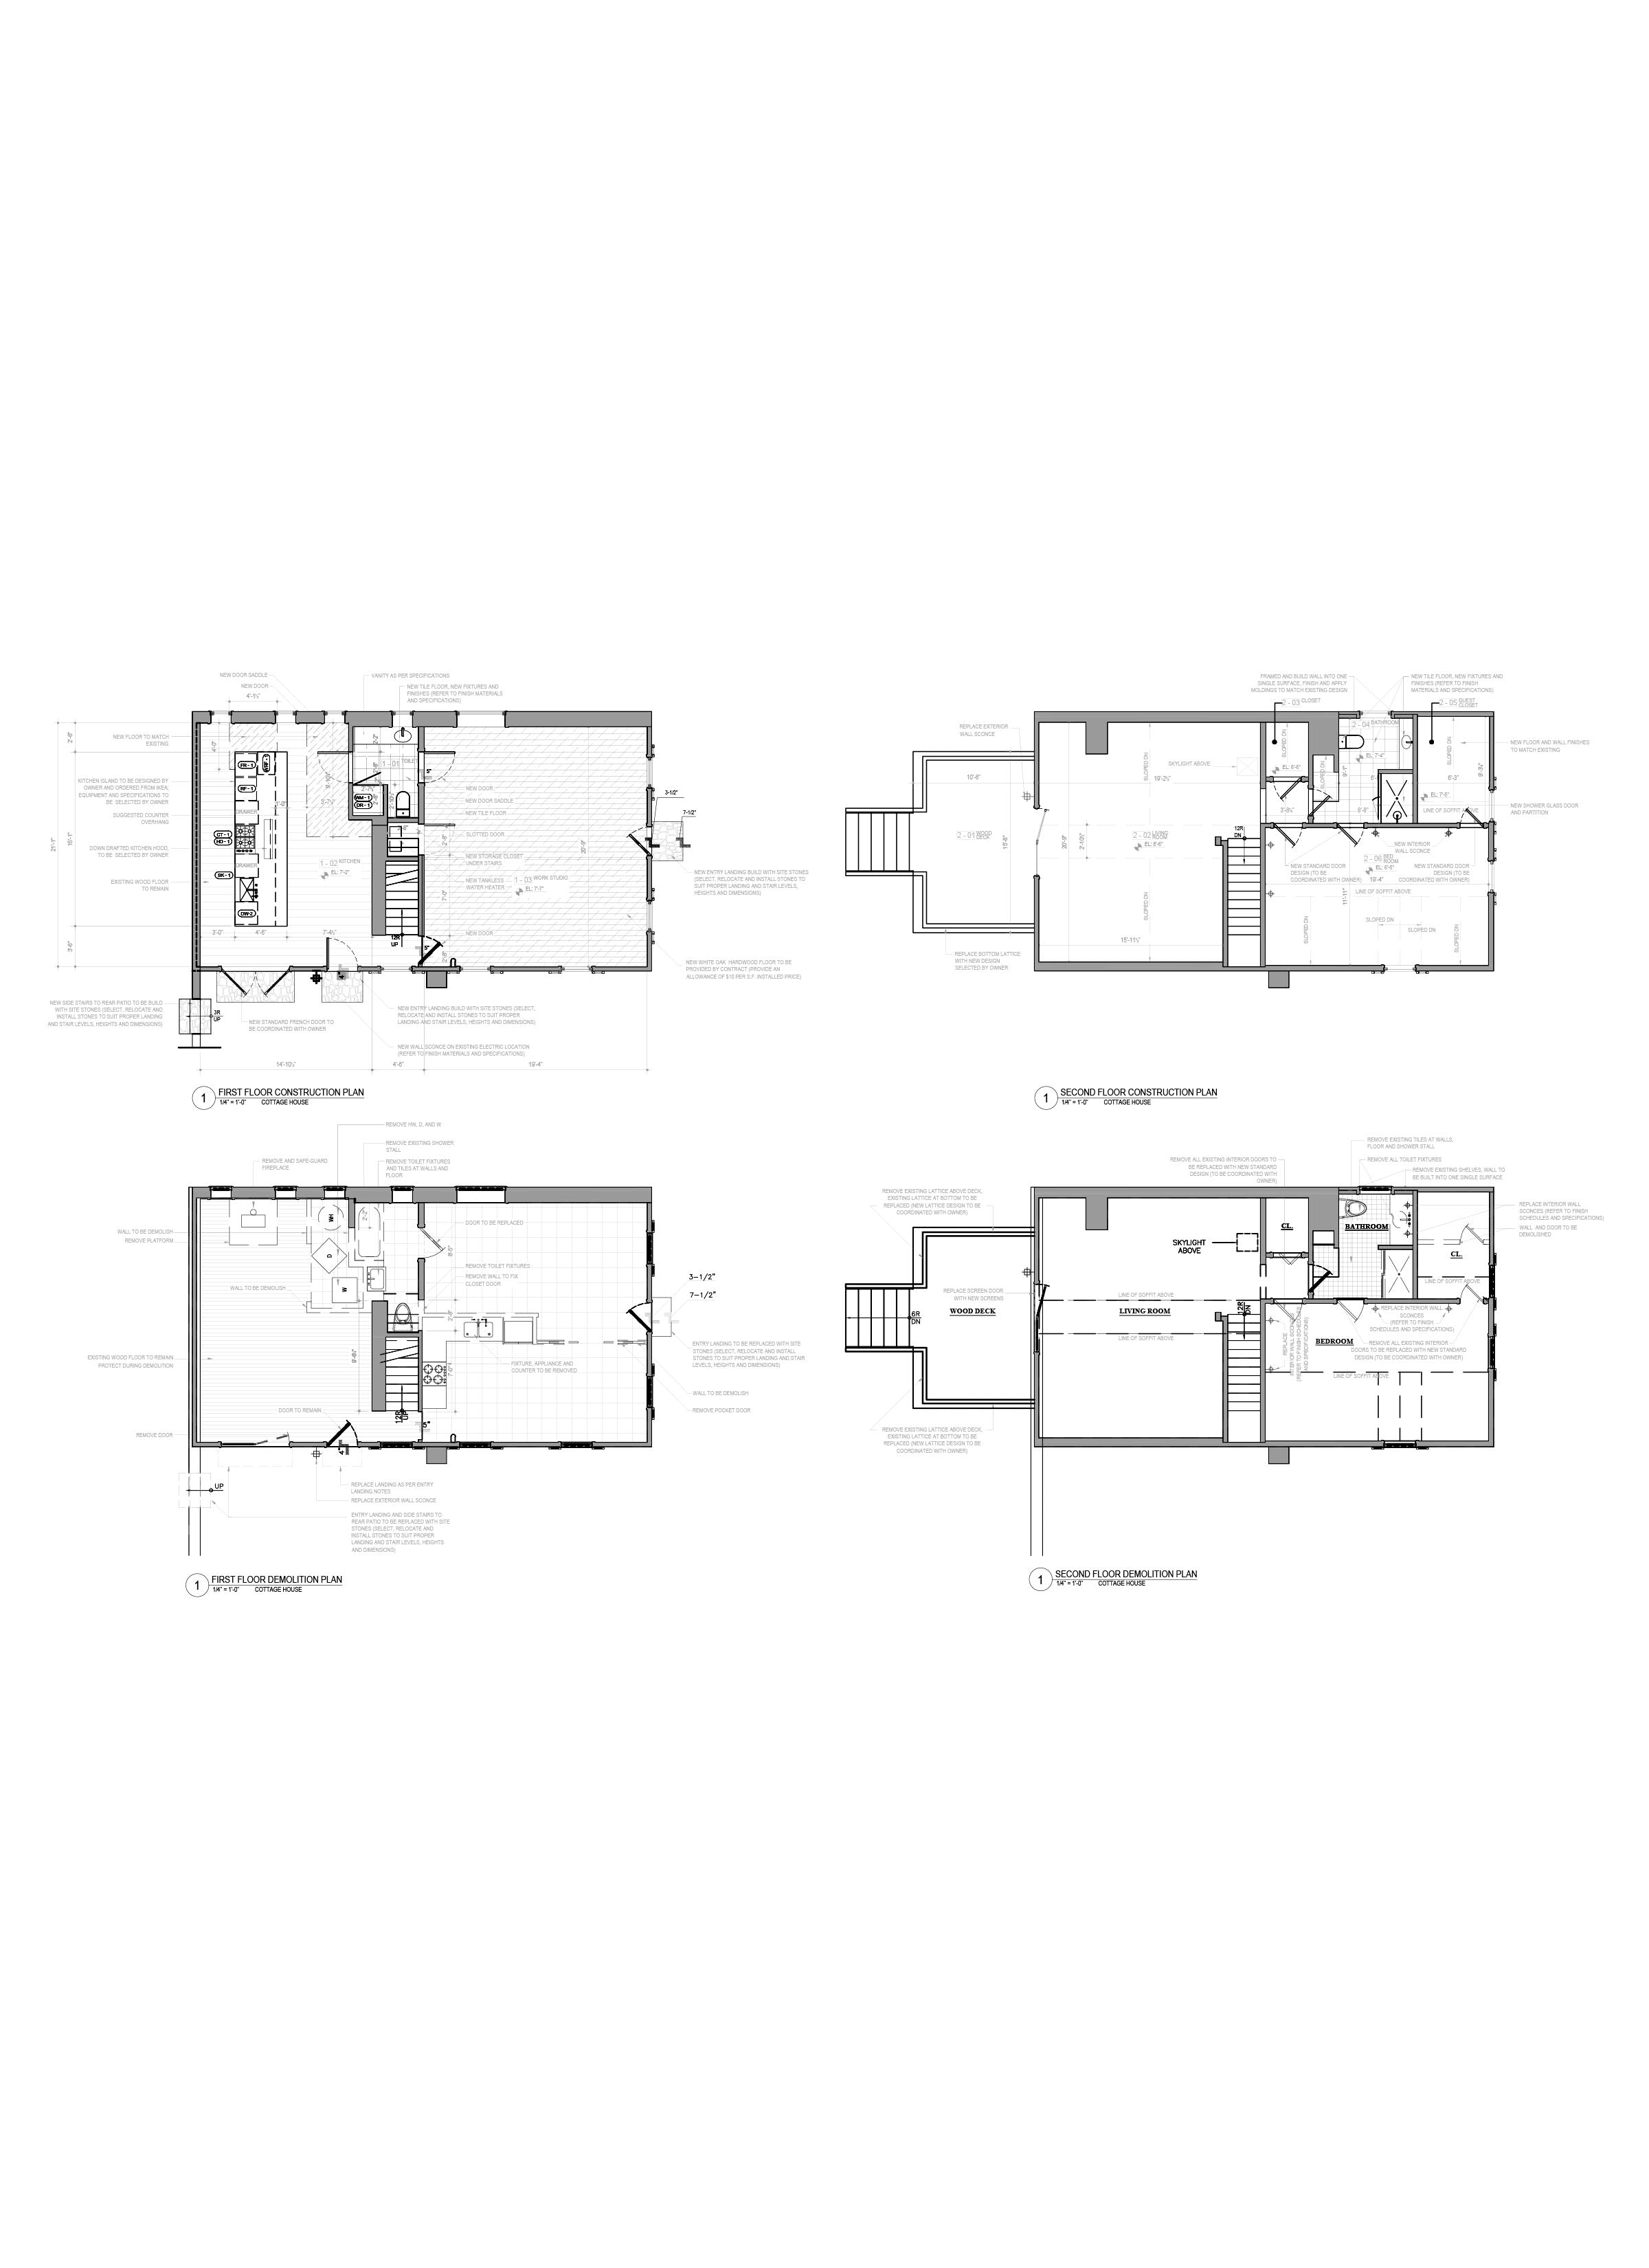 Floor plan design - As Built Drawings - AutoCAD drafting_HomeApartment_Brewster, NY